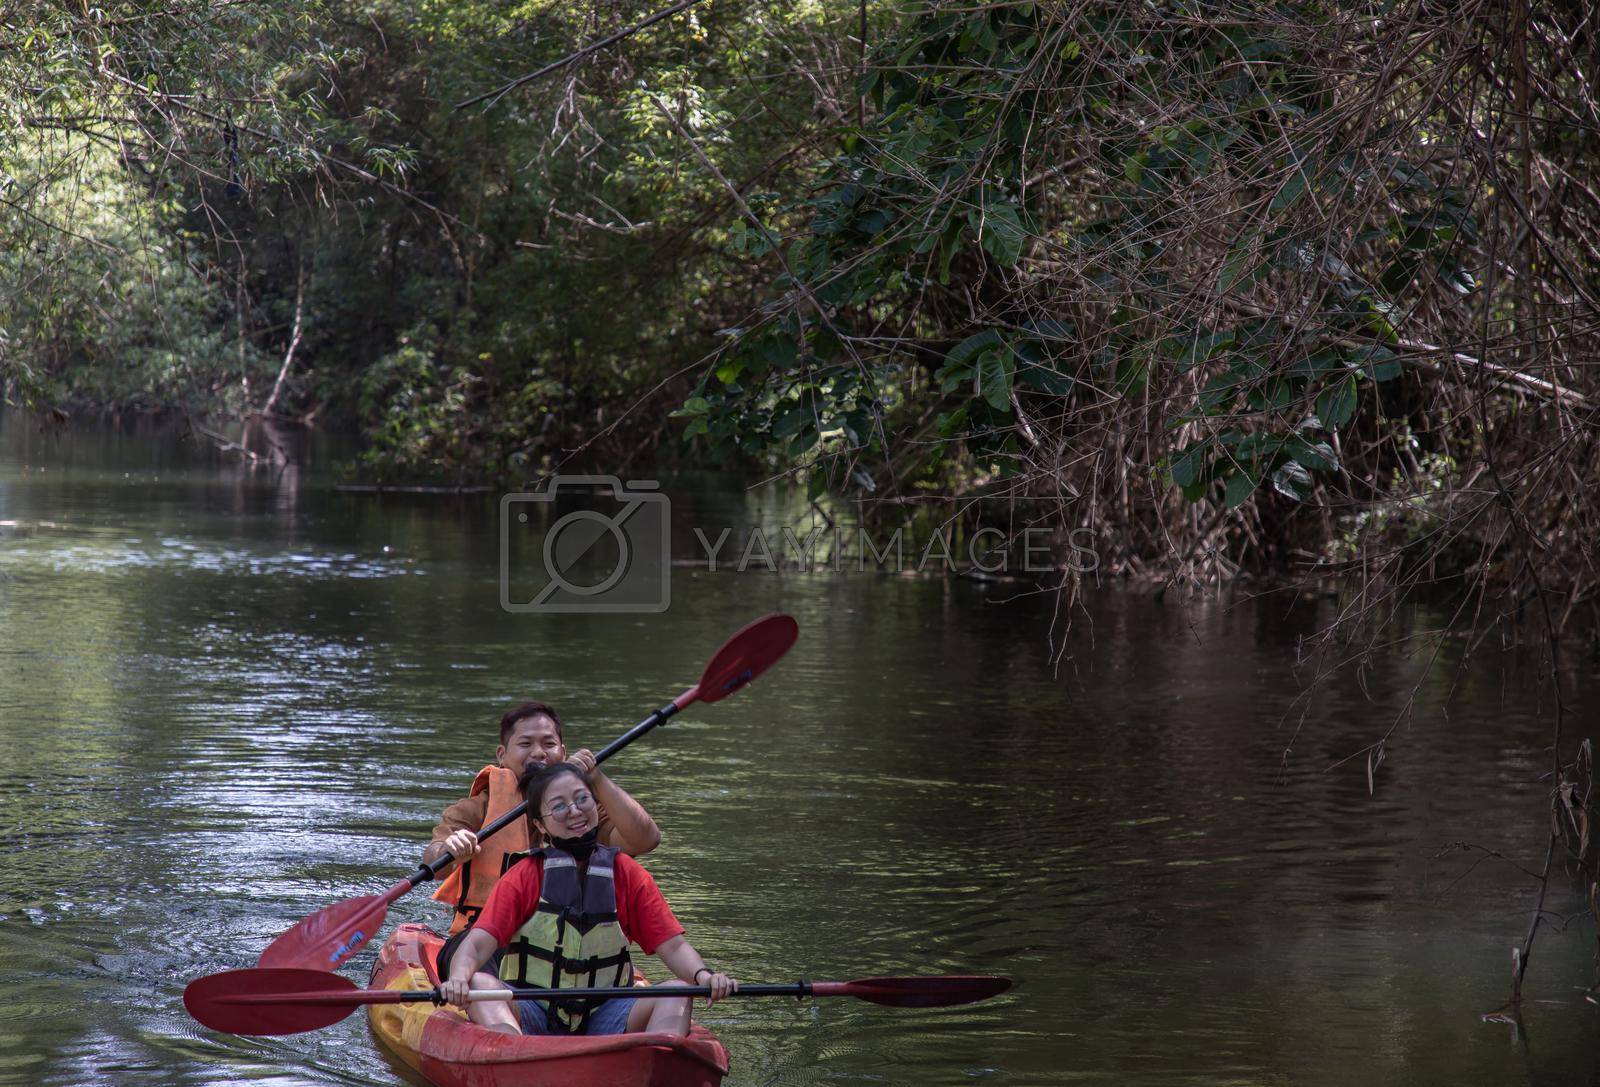 Nakhon Ratchasima, Thailand. Mar - 20, 2022 : Woman and man adventurous people having fun together while red kayaking on brook in forest. Having fun in leisure activity, Nature and Tourist attraction concept. Selective focus.